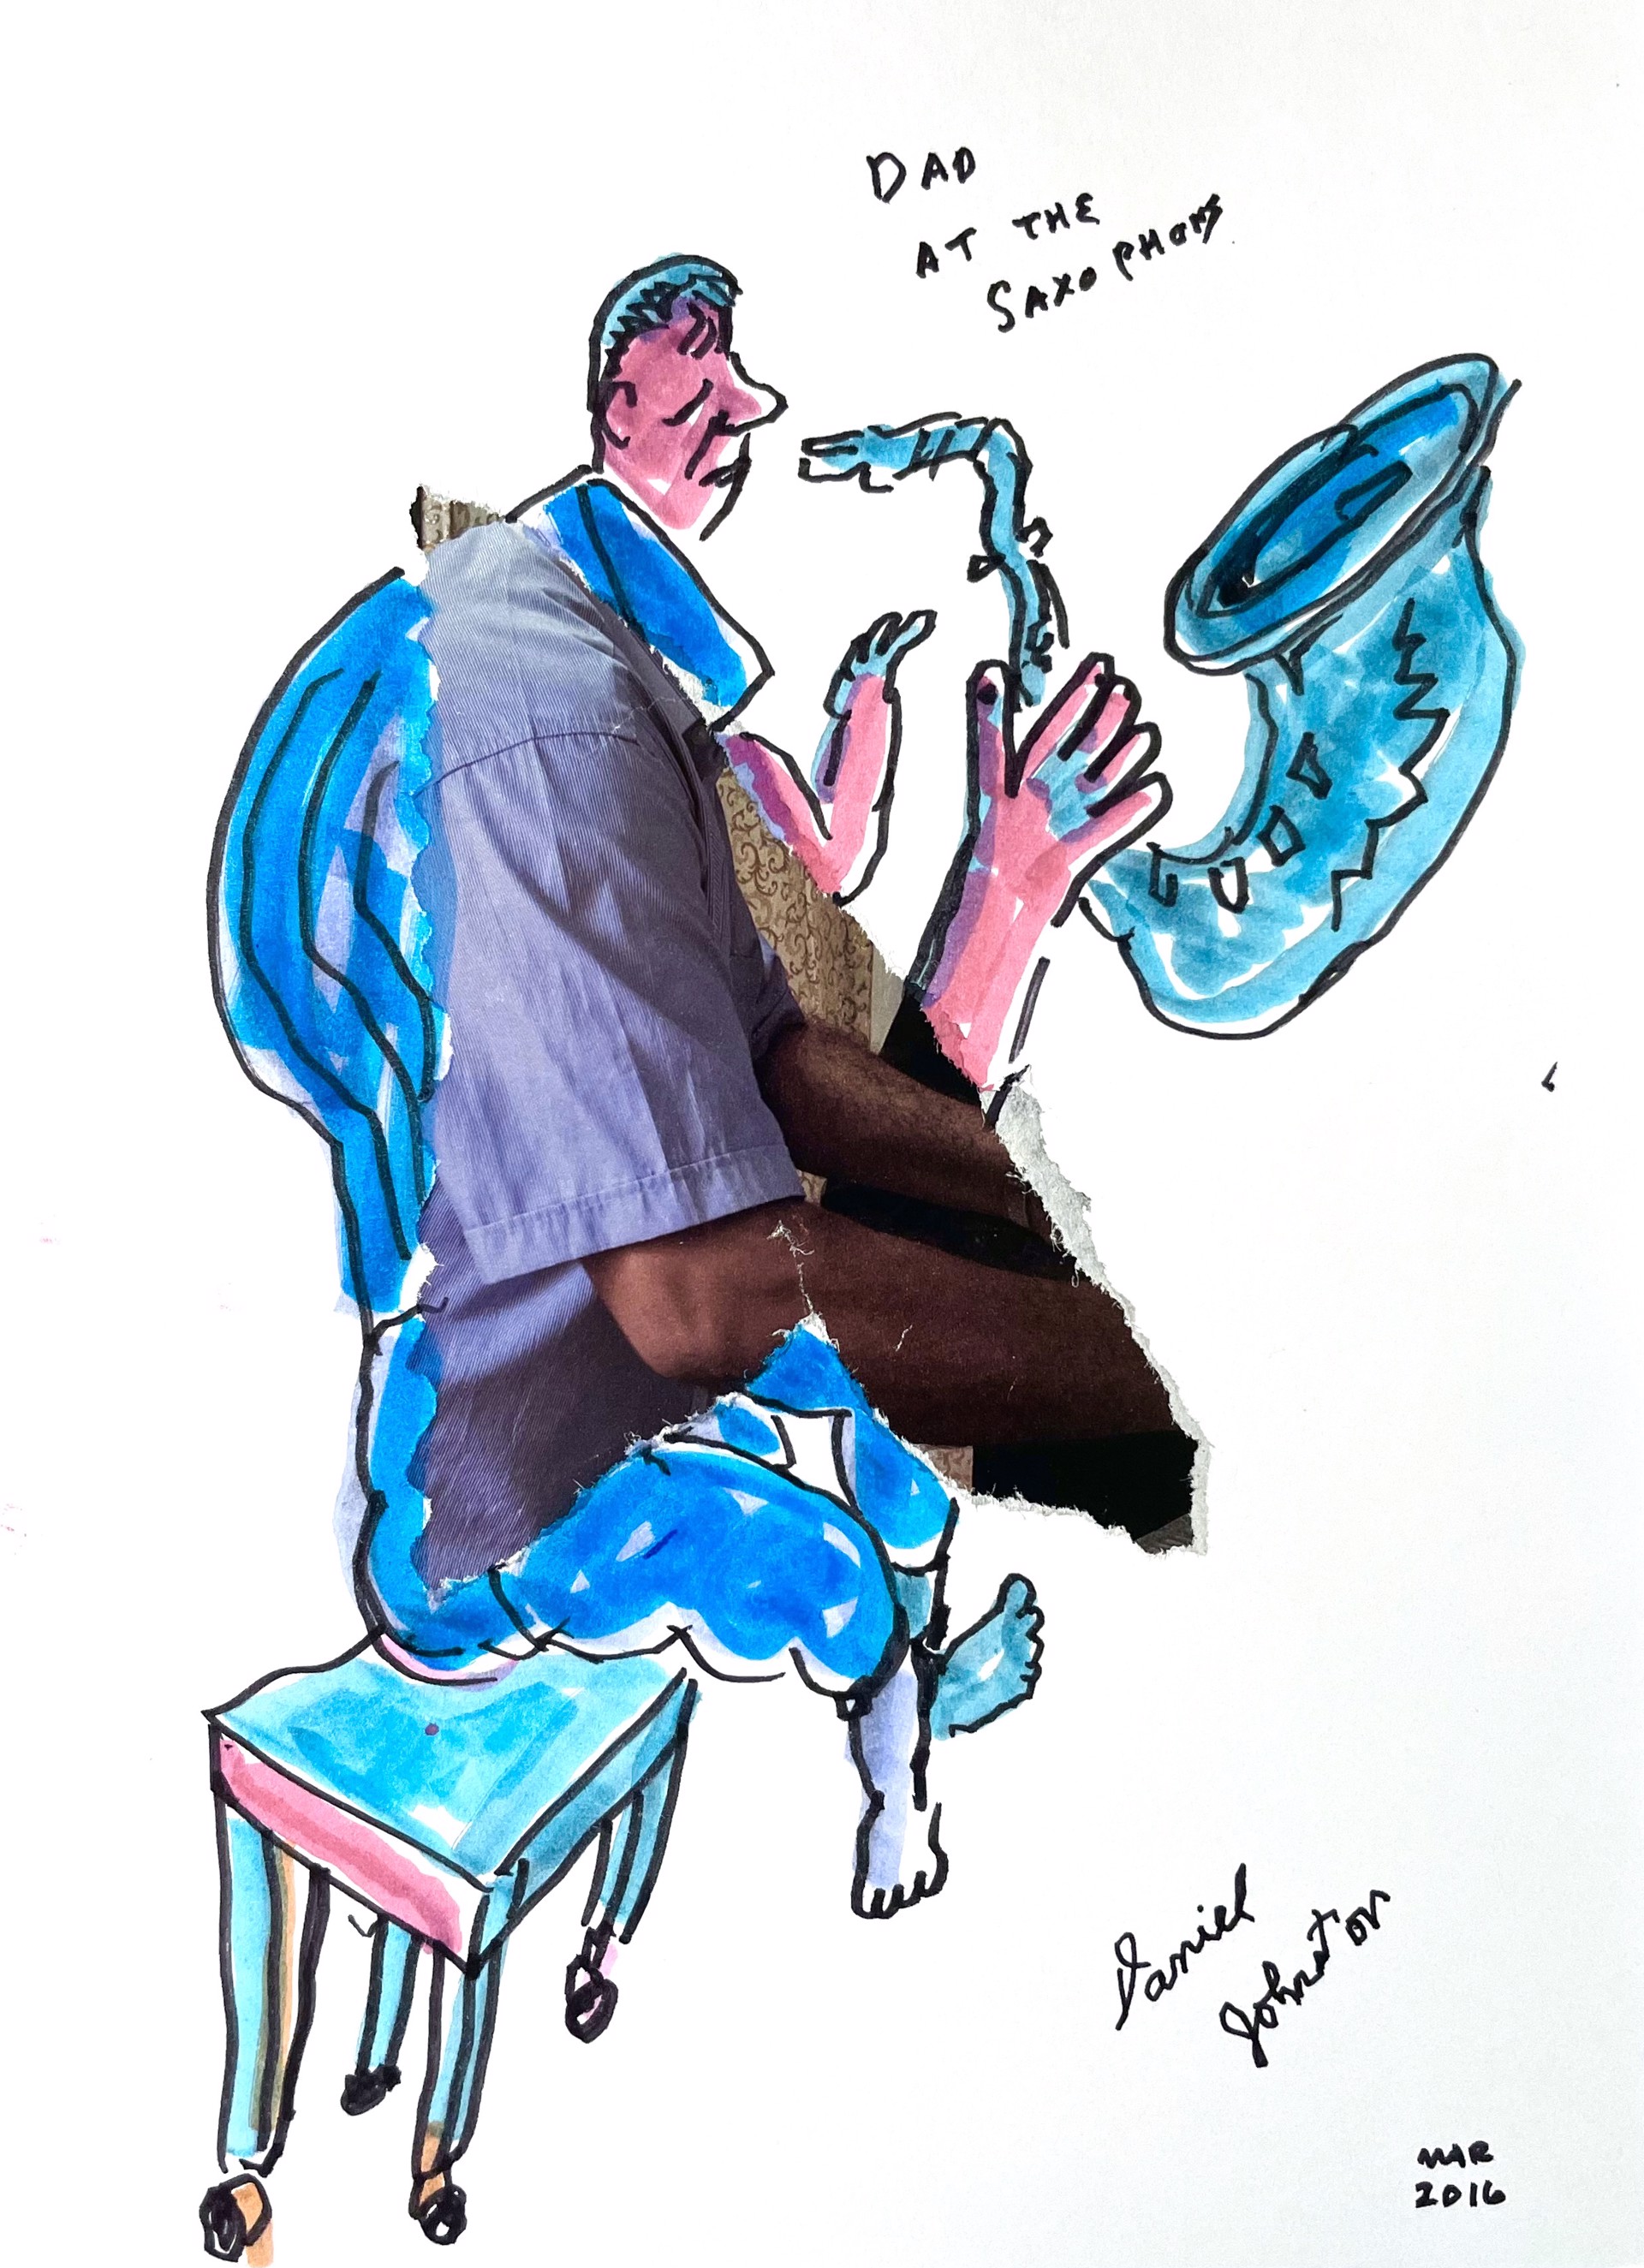 Dad At The Saxophone by Daniel & Marjory Johnston